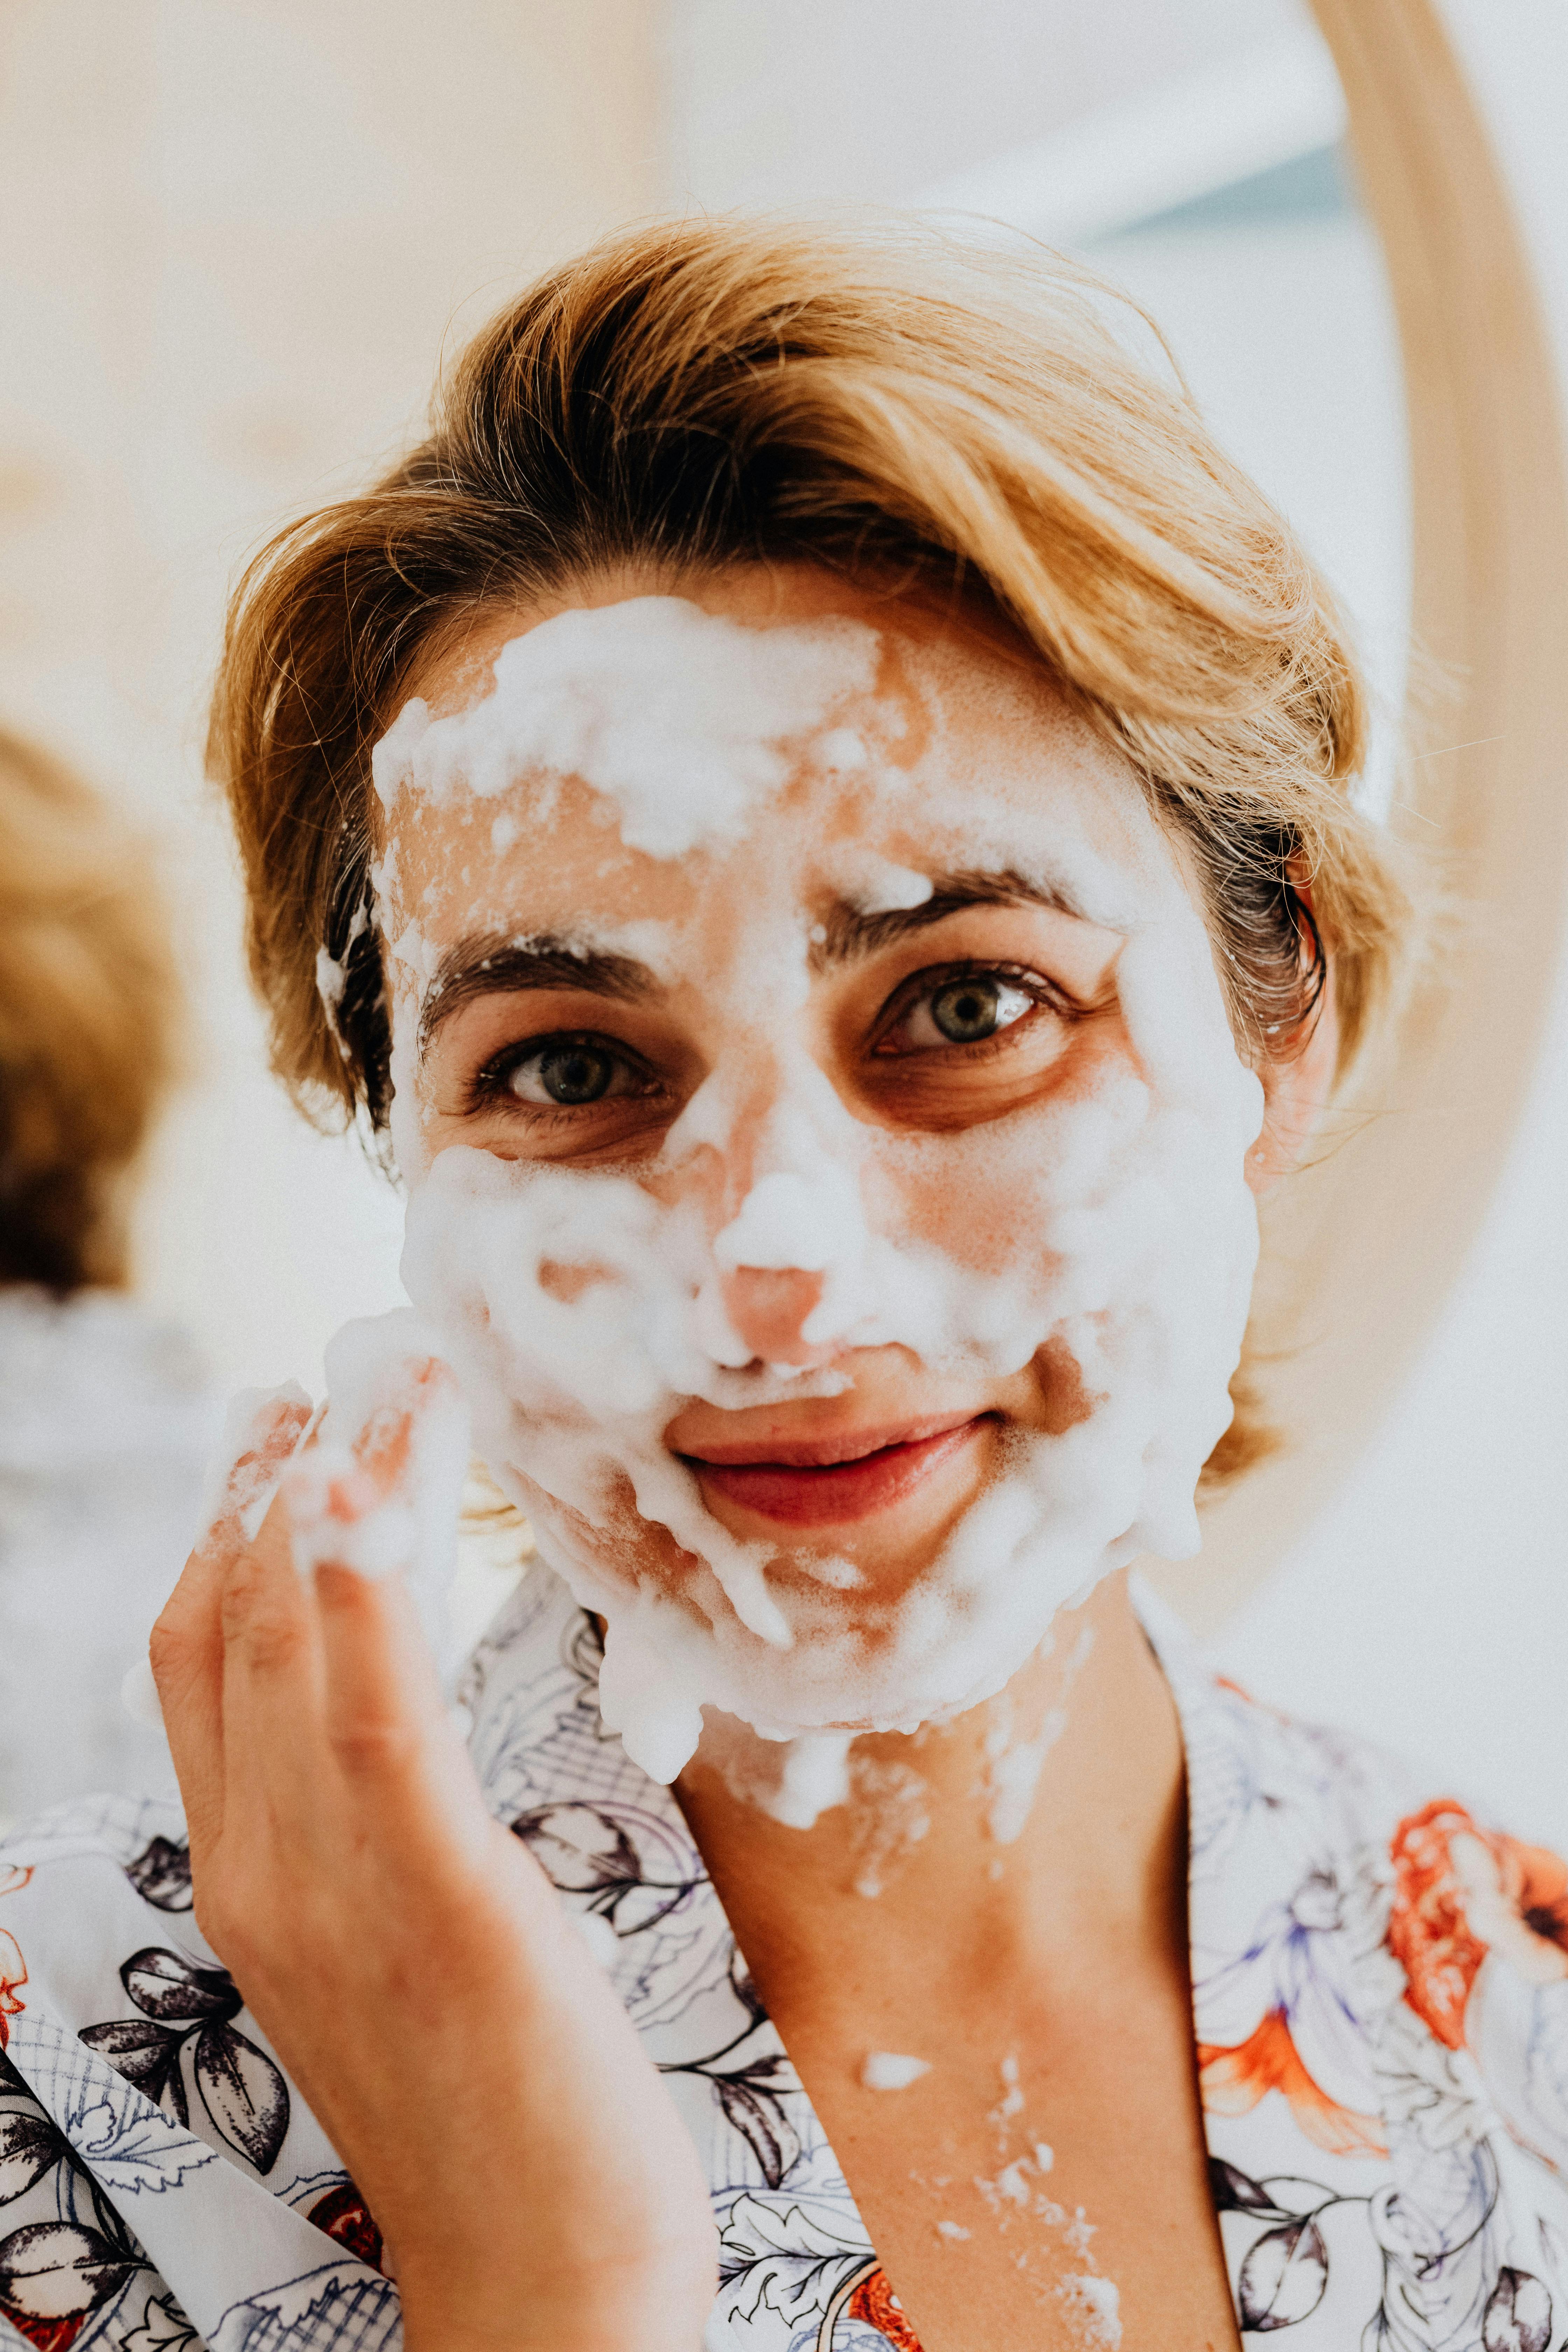 Woman With White Face Paint · Free Stock Photo